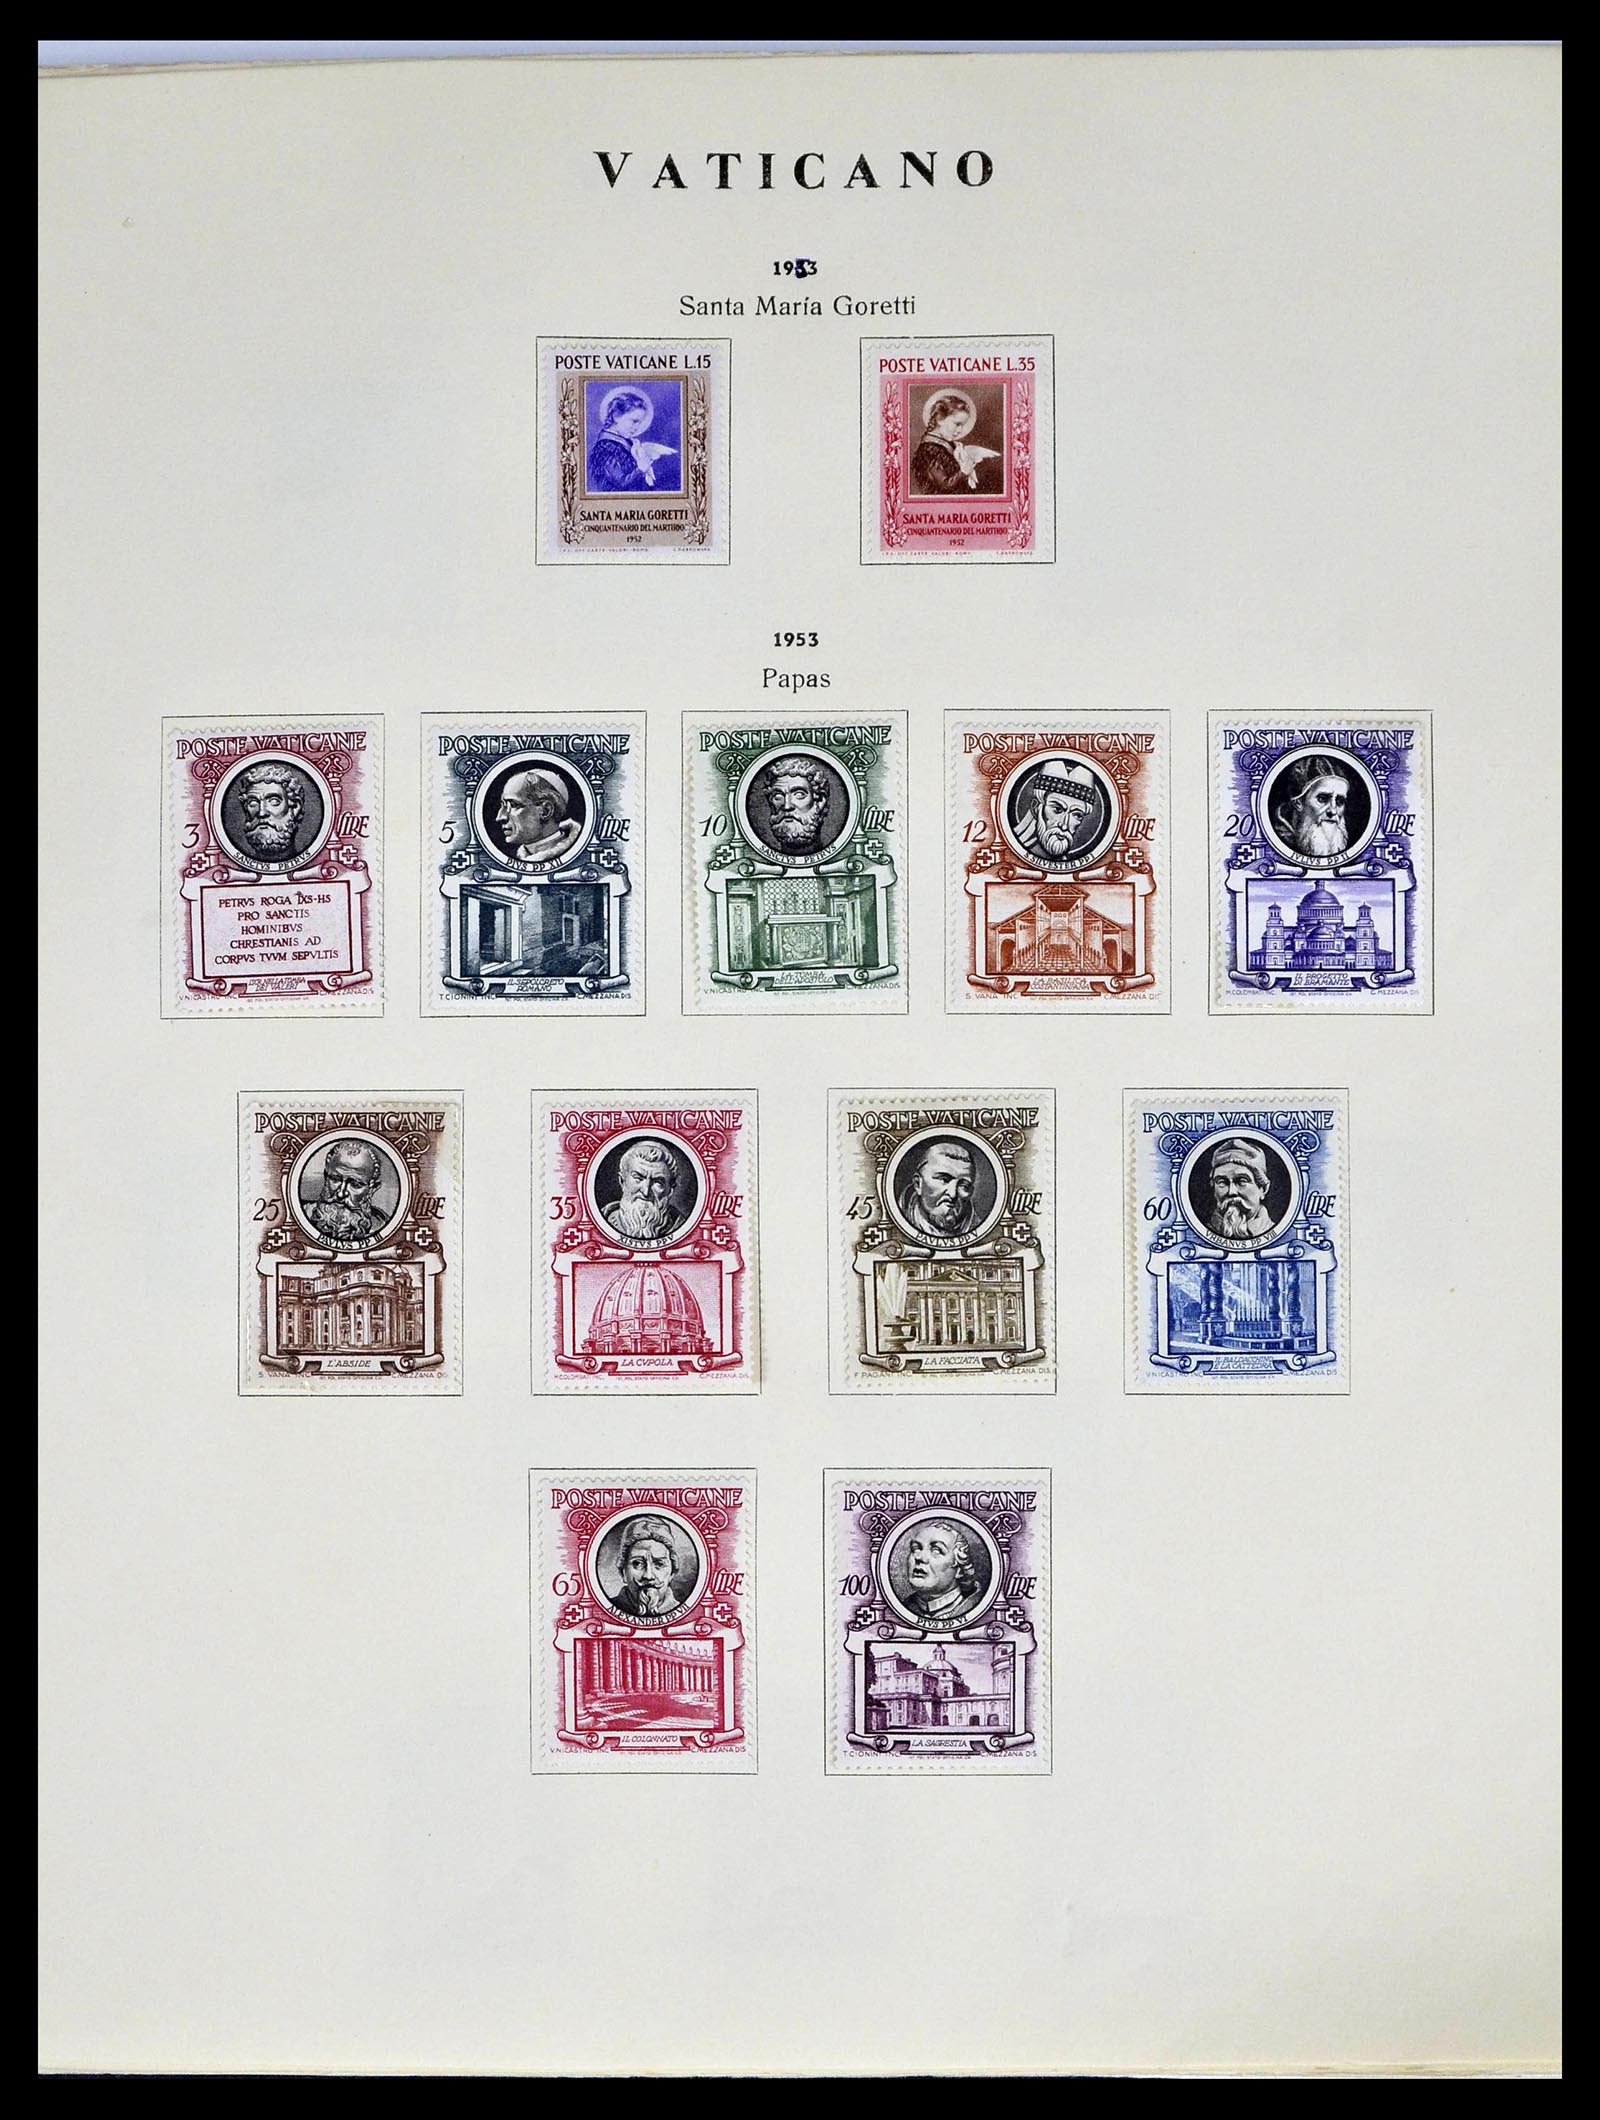 39249 0012 - Stamp collection 39249 Vatican 1852-1986.